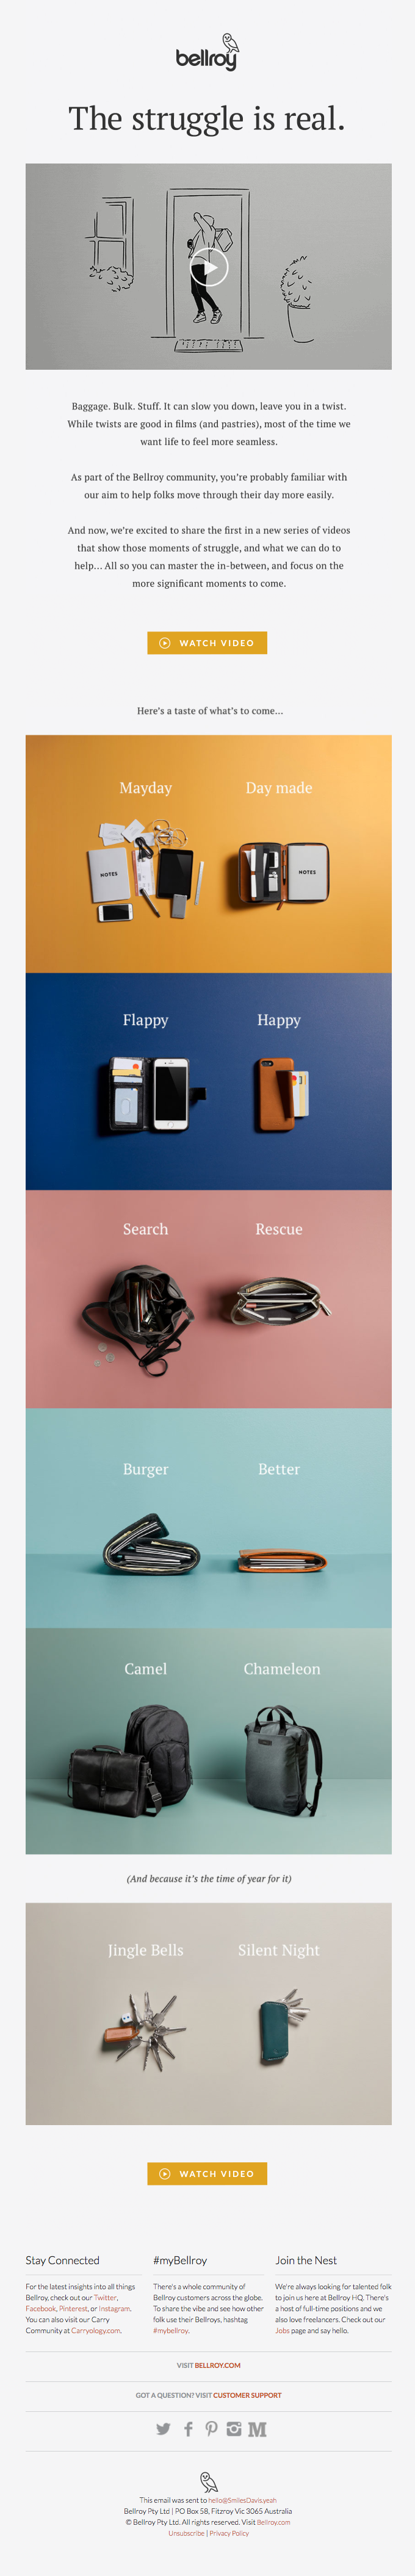 The struggle is real… but so is the solution. - Bellroy Email Newsletter